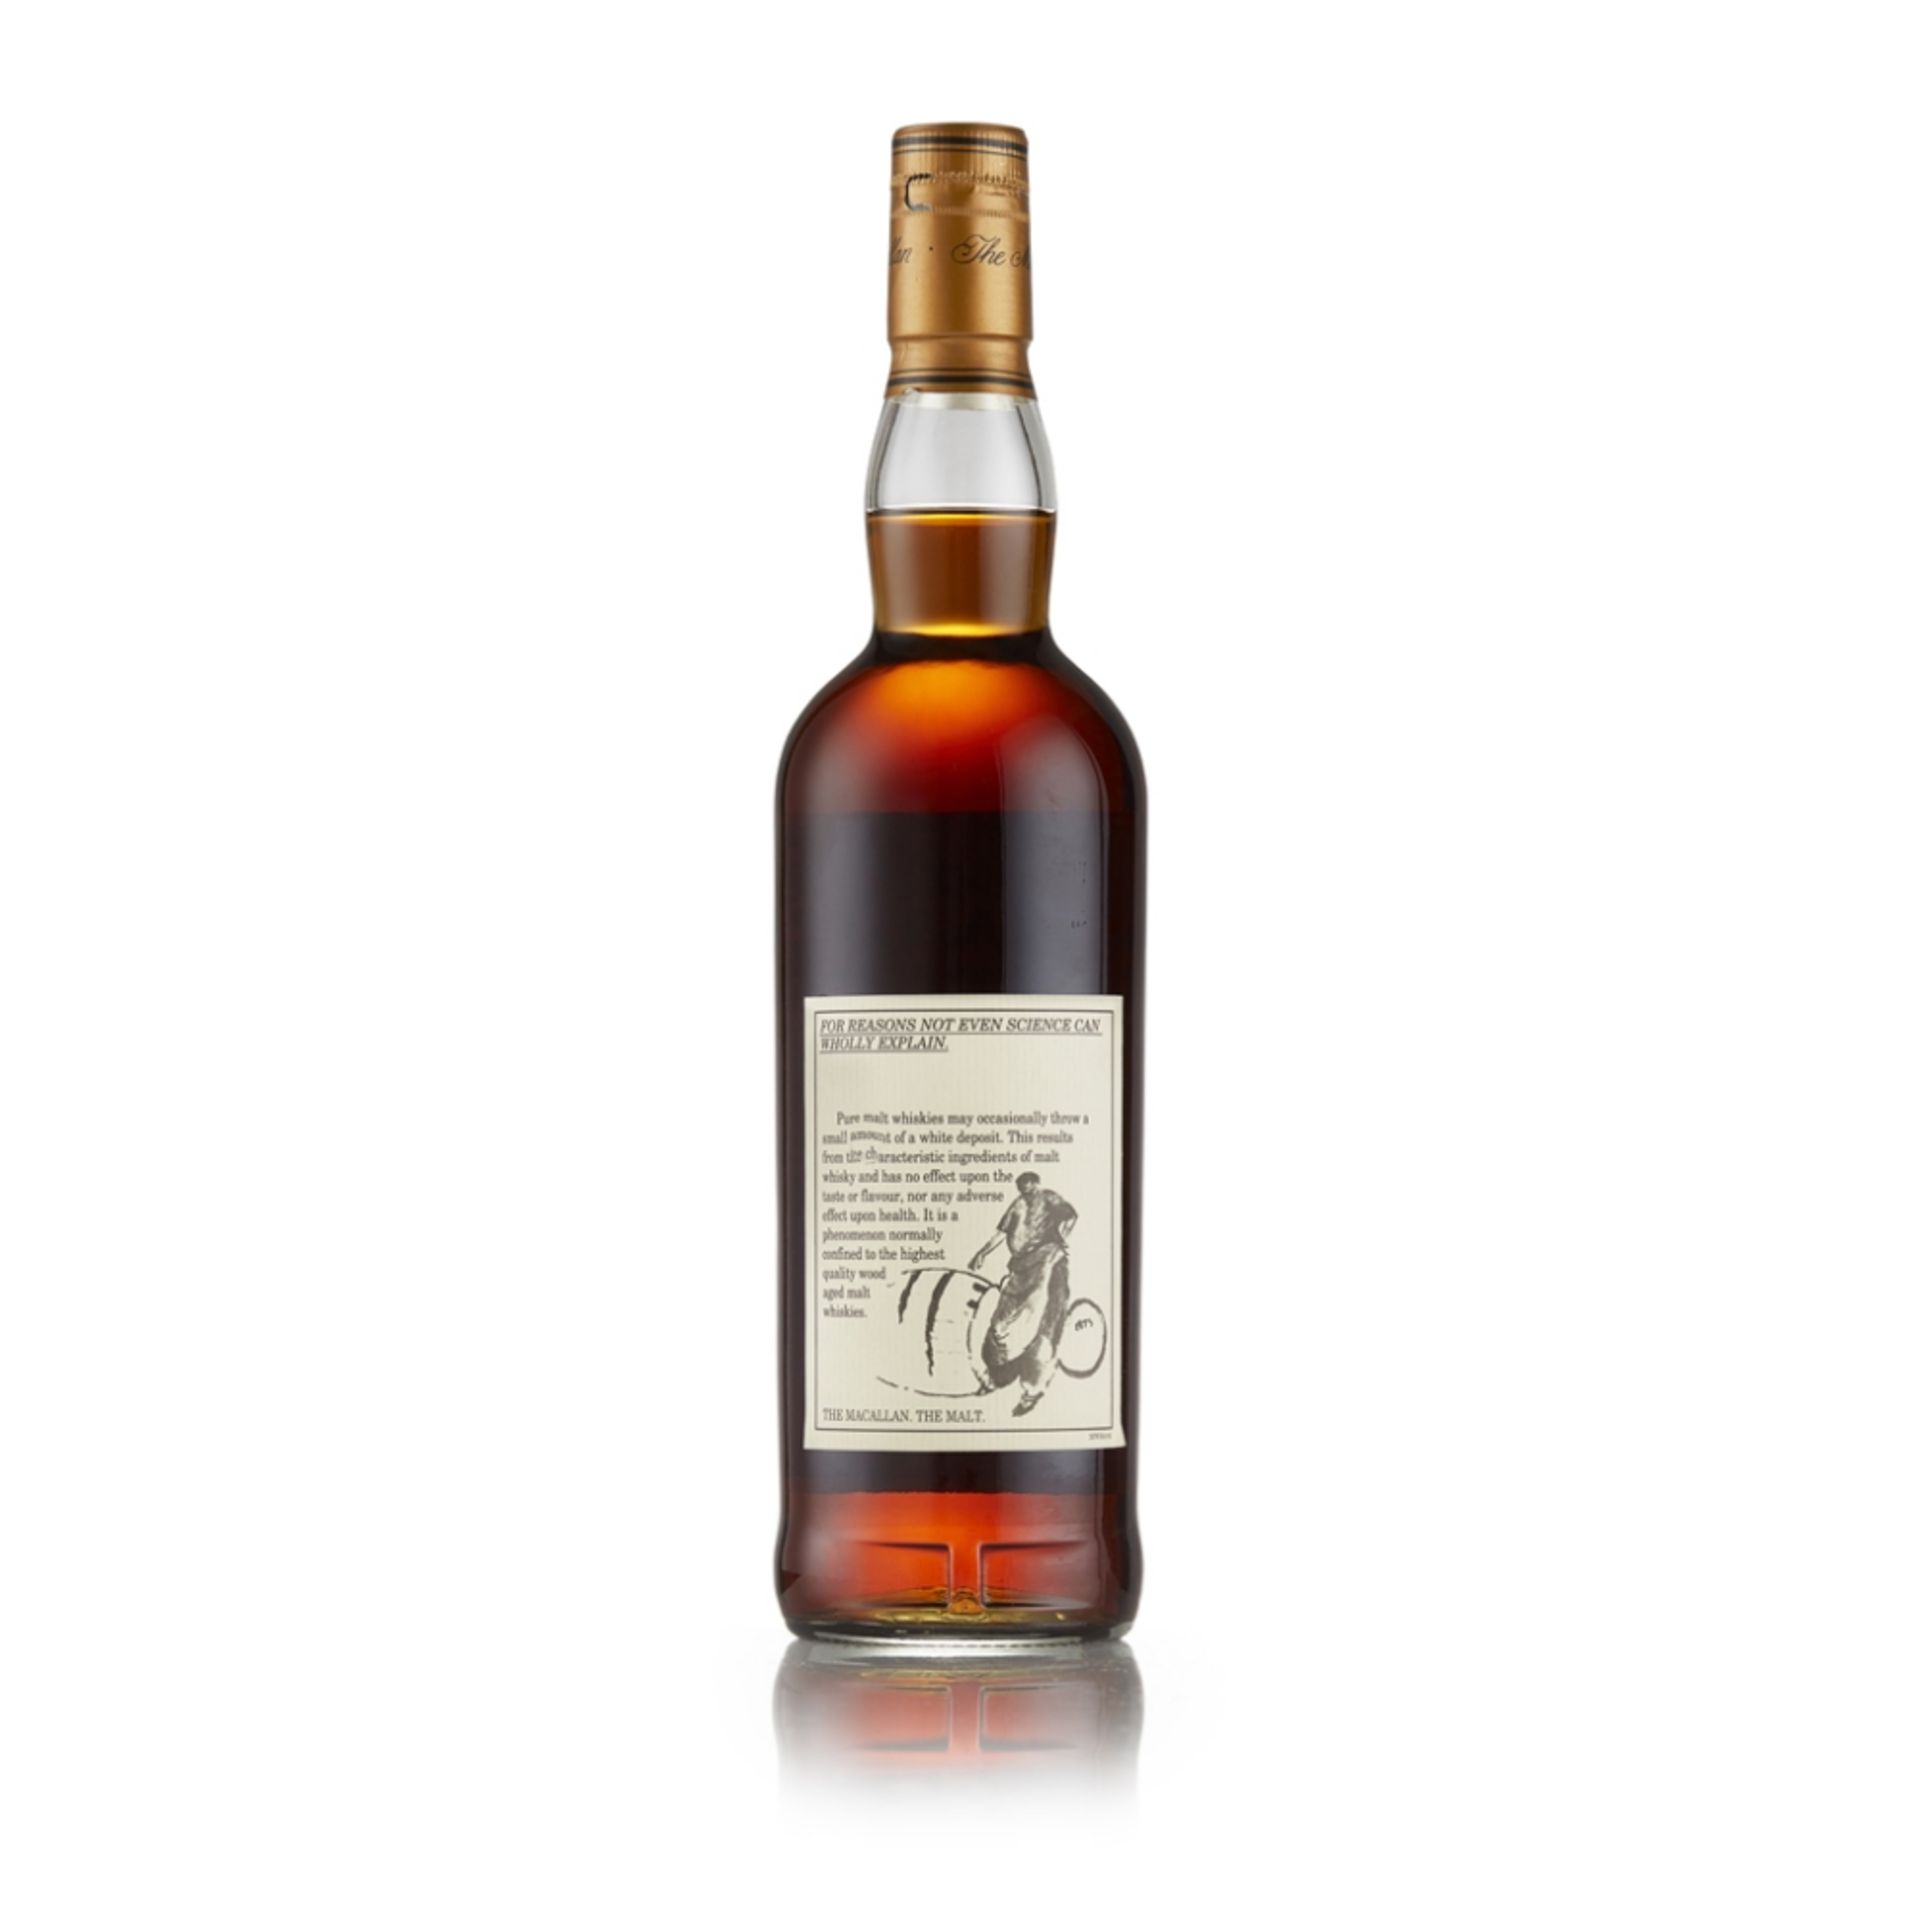 THE MACALLAN 25 YEAR OLD ANNIVERSARY MALT with wooden presentation case 70cl/ 43% - Image 2 of 3